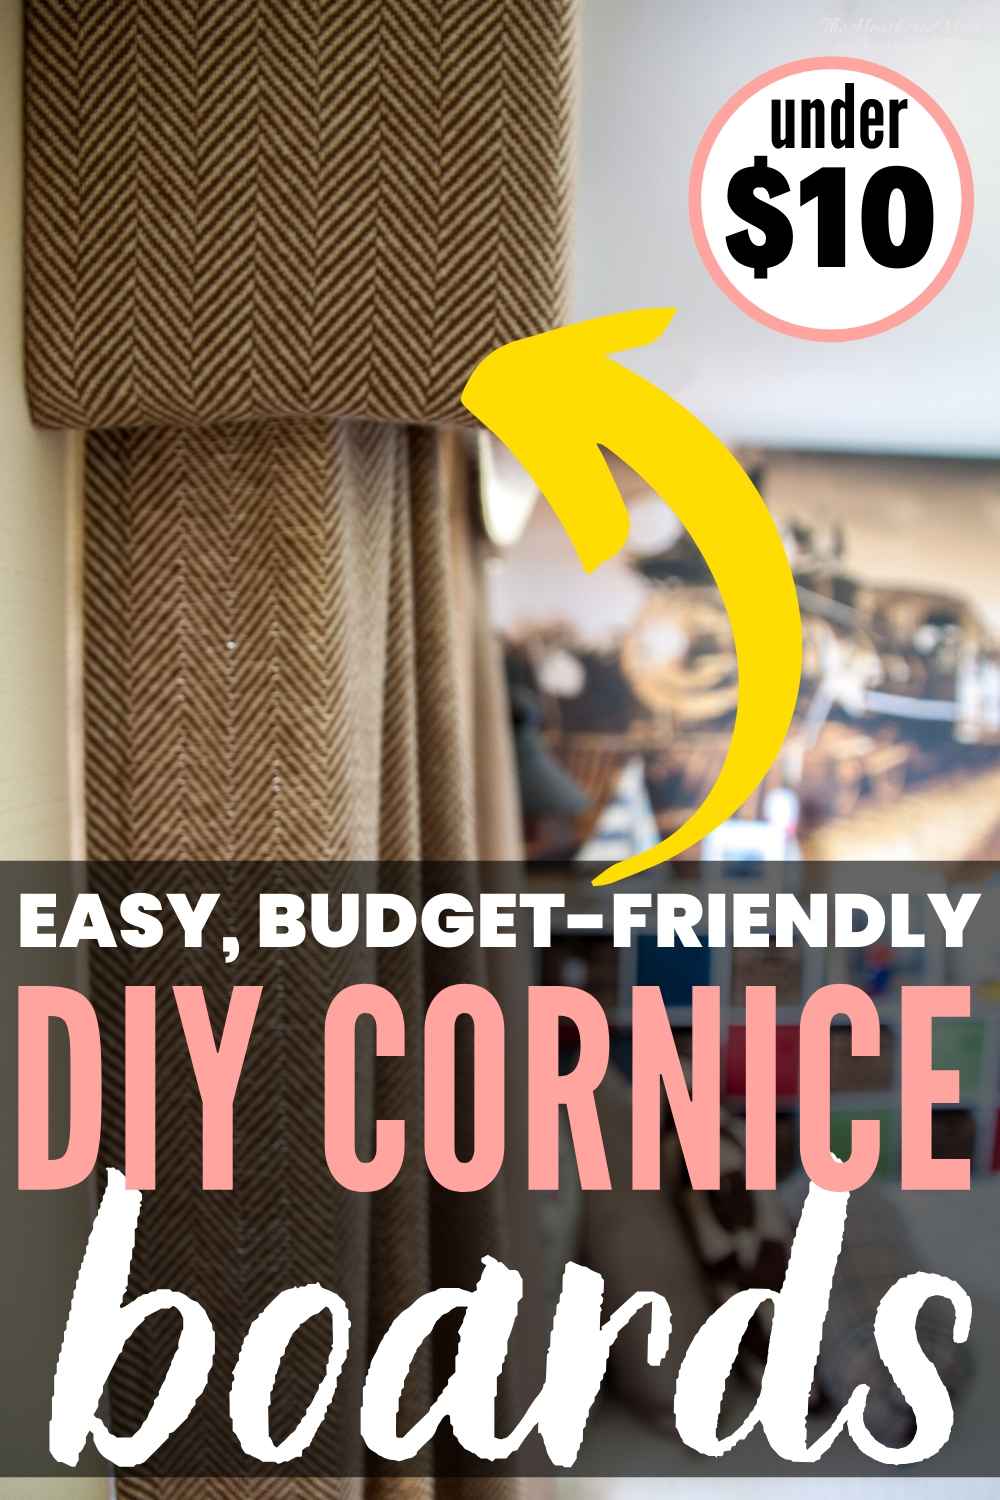 All about DIY cornices